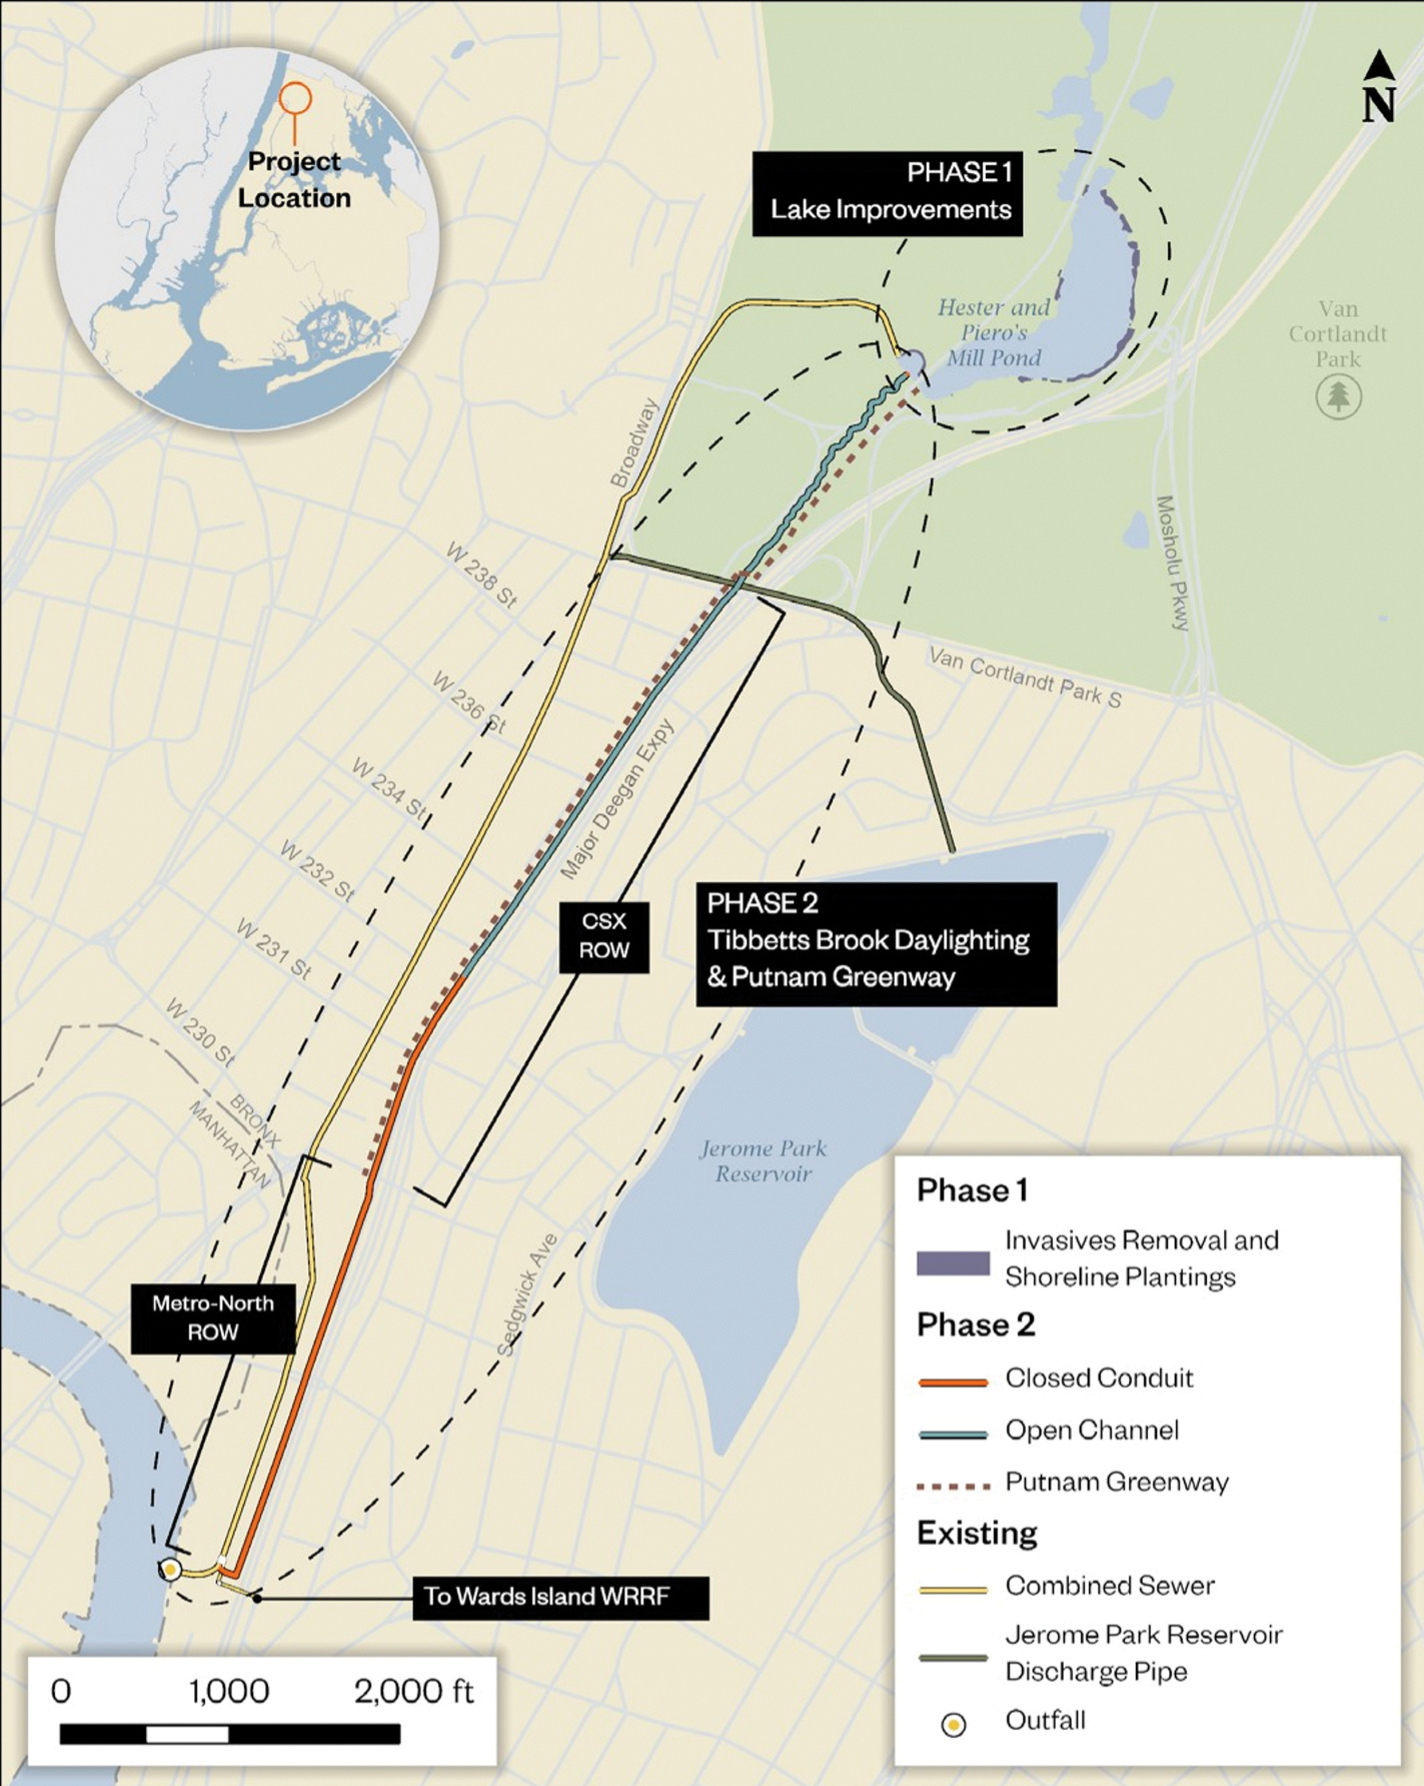 A map highlights the scope of work for the Tibbetts Brook Daylighting project. Image credit: New York City Department of Environmental Protection